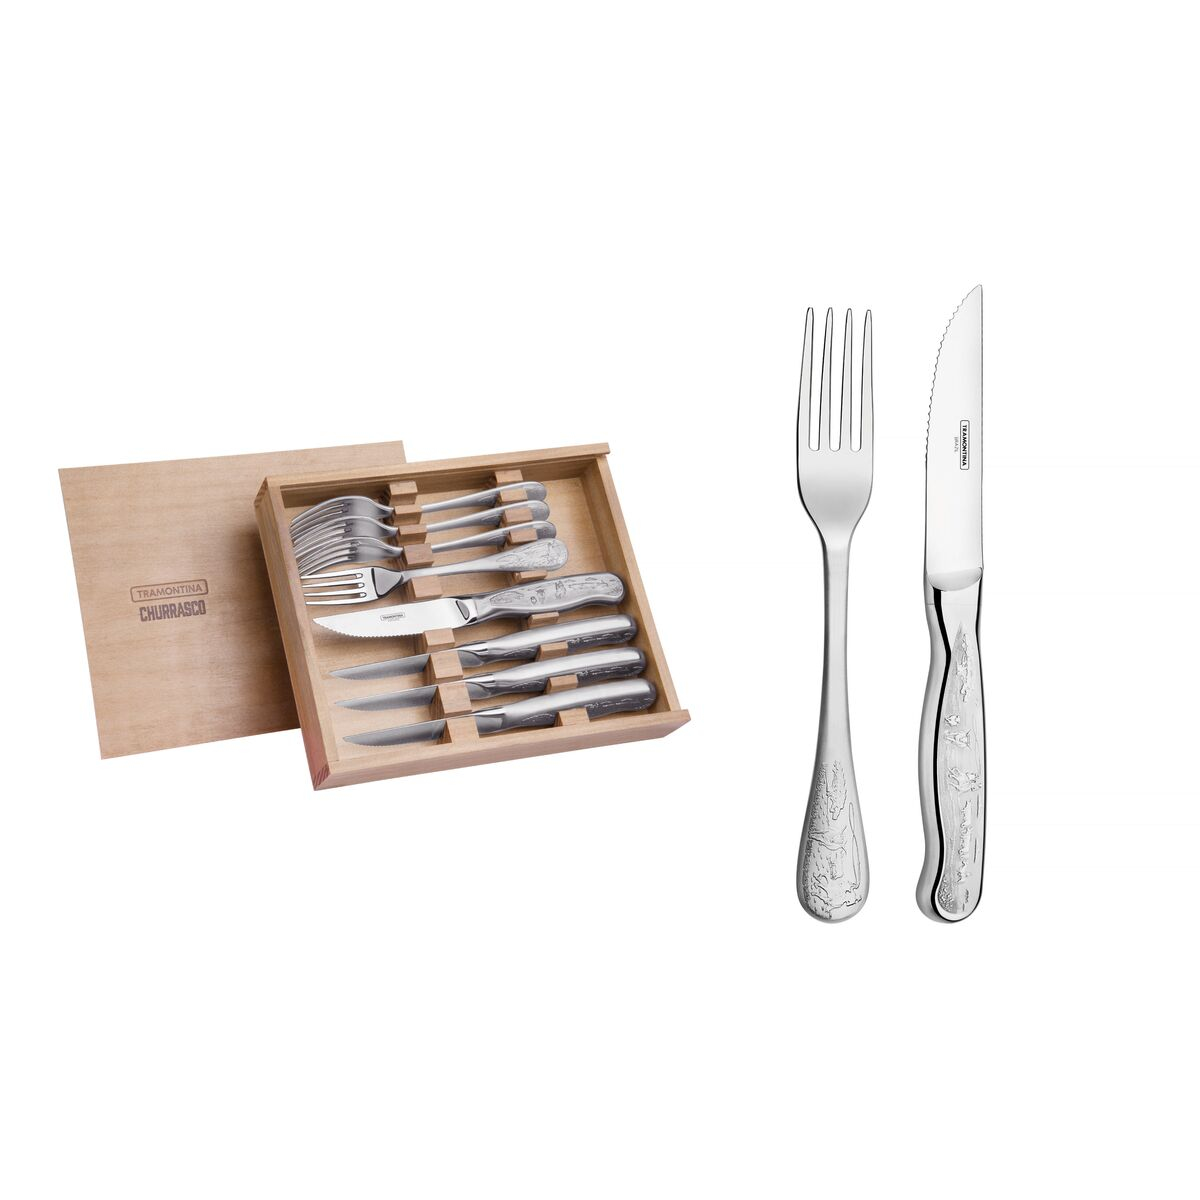 Tramontina Classic stainless steel barbecue set with wooden case and relief patterns on the handle, 8 pieces